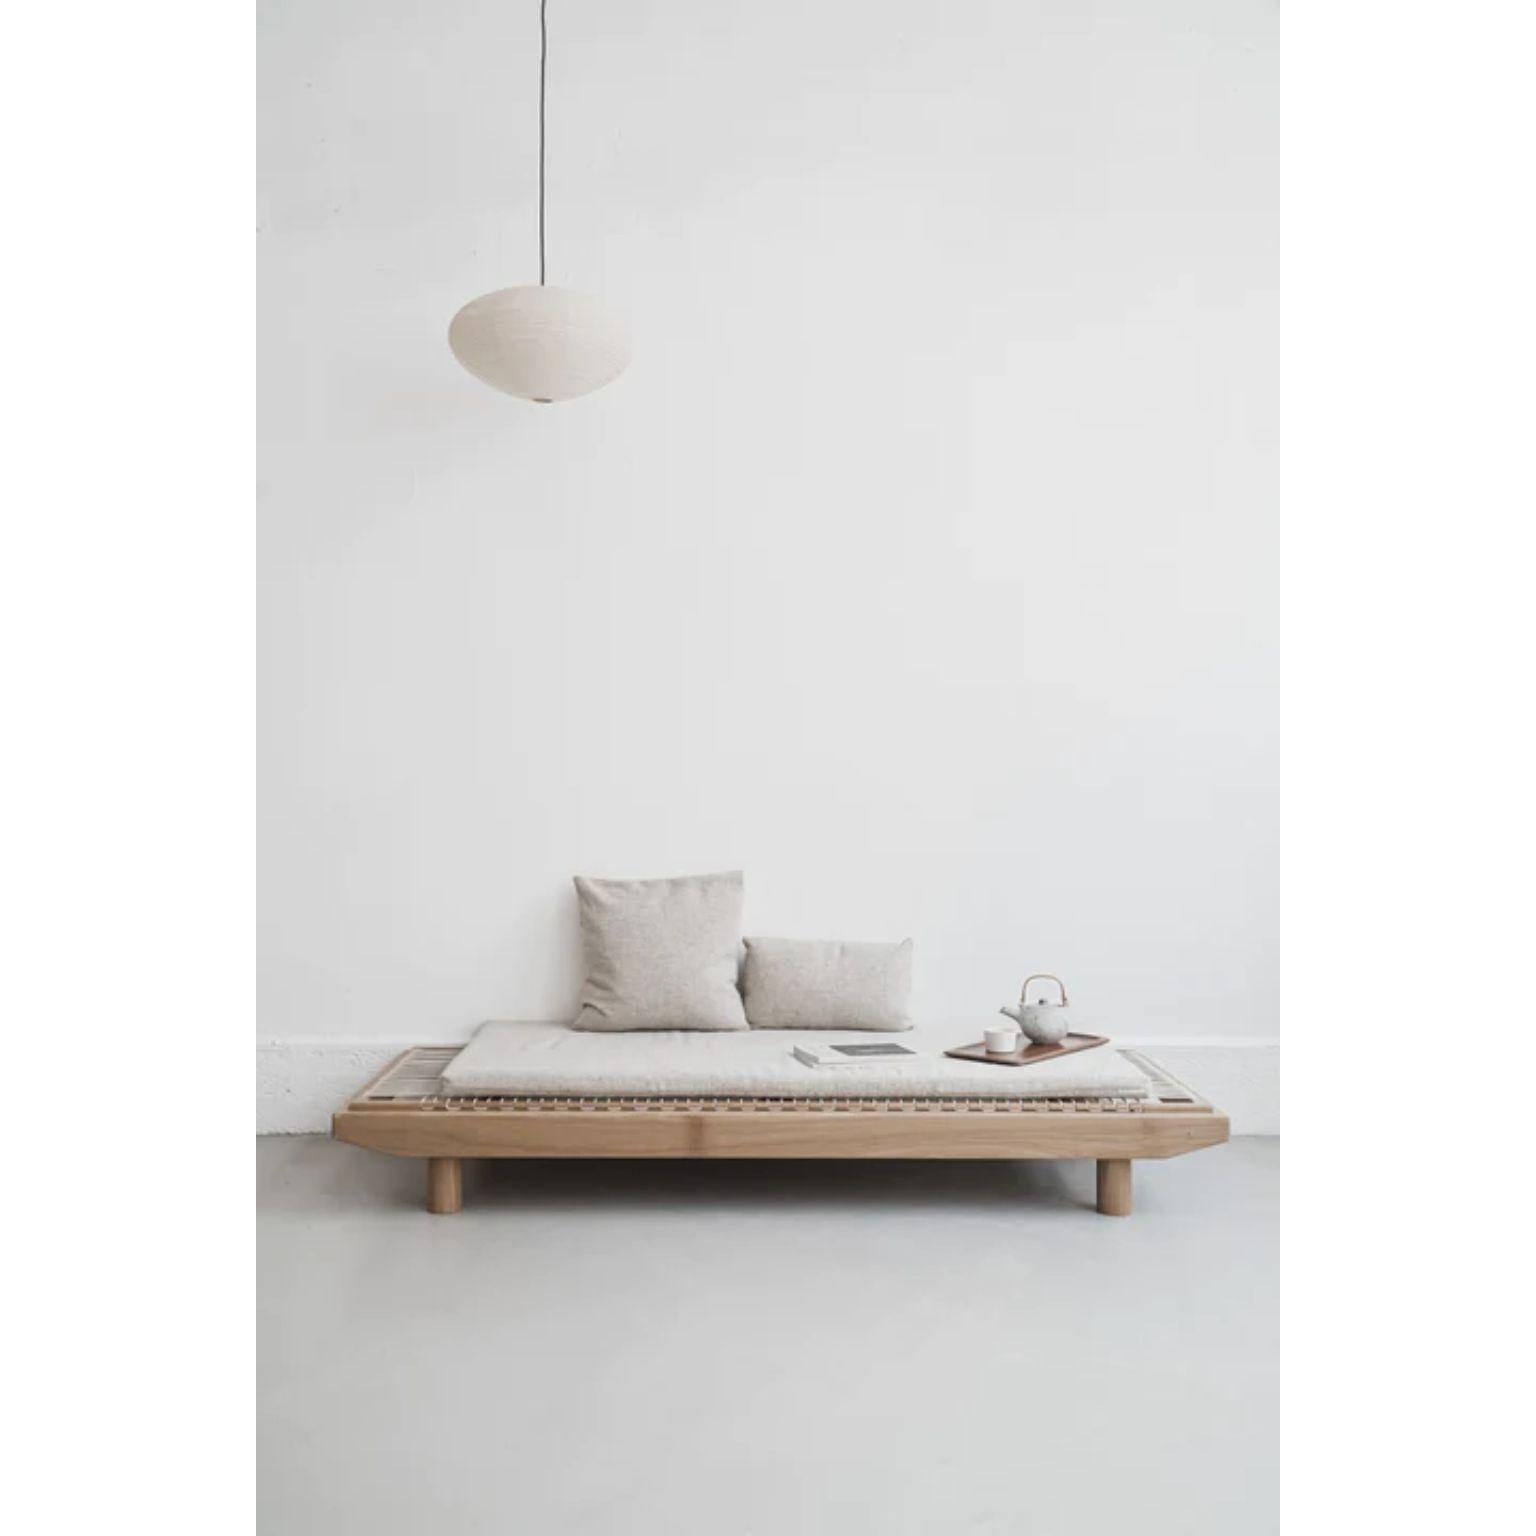 Dena Wool Greige Daybed by La Lune
Dimensions: D 75 x W 200 x H 31 cm.
Materials: Oak and Wool.
Oak structure, mattresses and cushions in wool or linen. Produced in France. Available in Warm Grey.
Custom sizes available. Please contact us.

La Lune